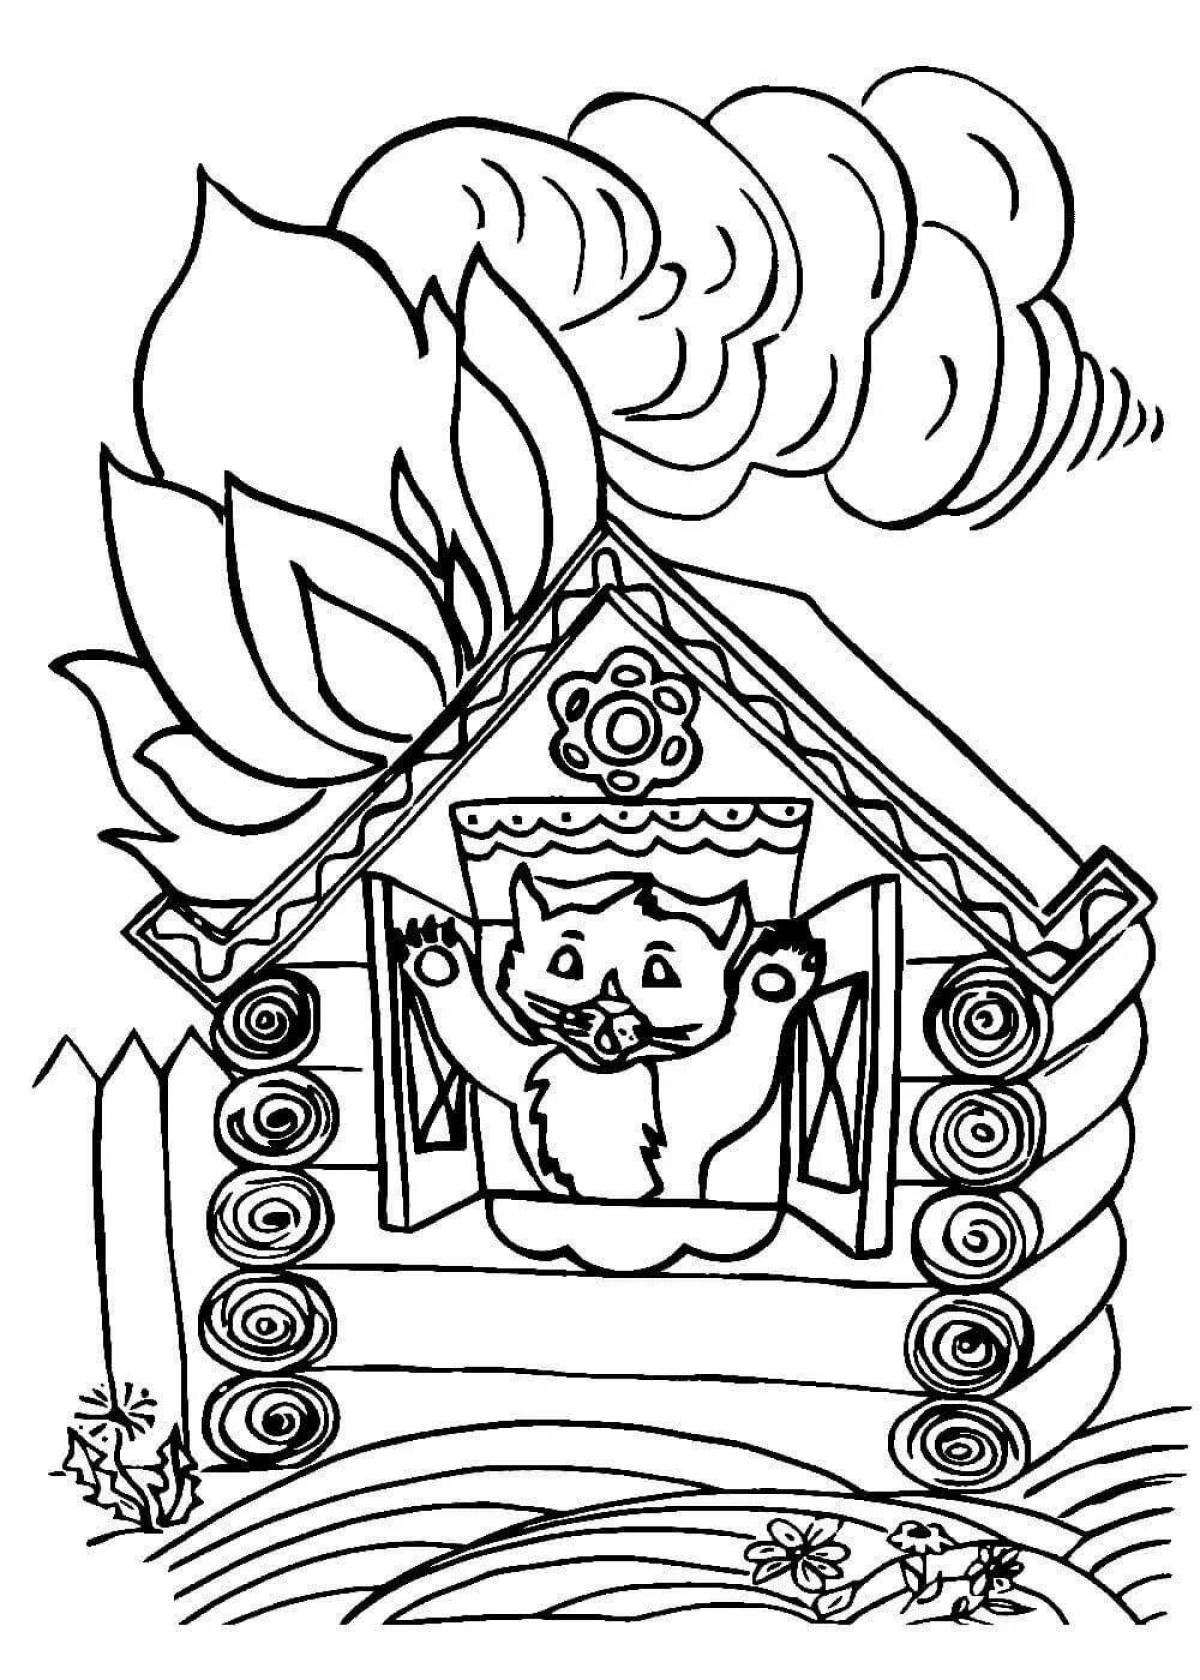 Awesome burning house coloring book for kids